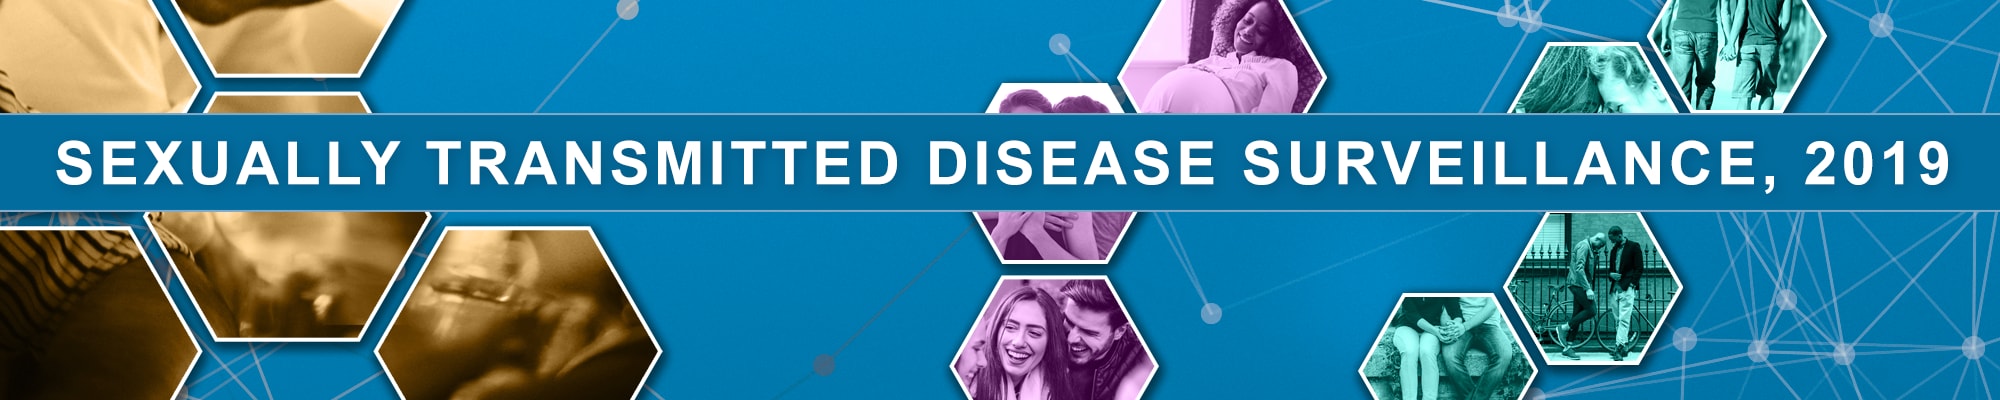 Sexually Transmitted Diseases Information From Cdc